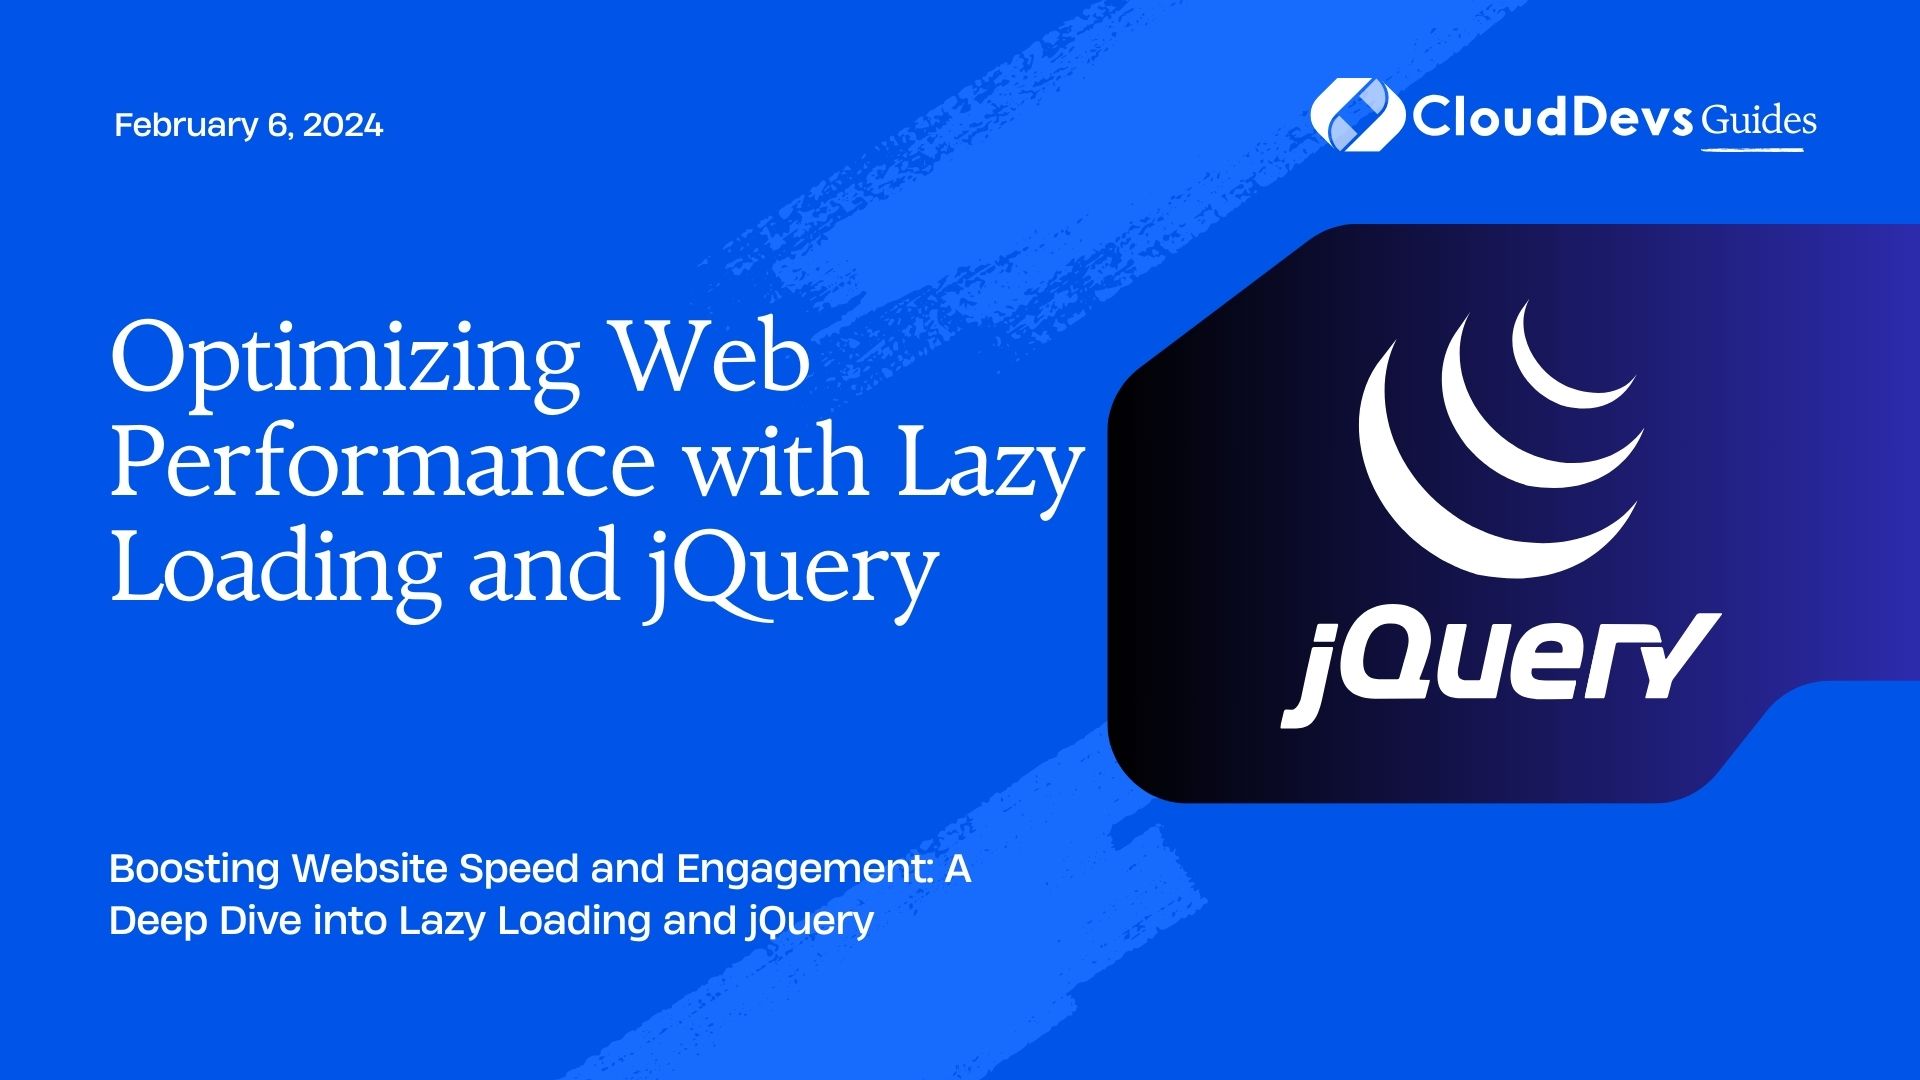 Optimizing Web Performance with Lazy Loading and jQuery